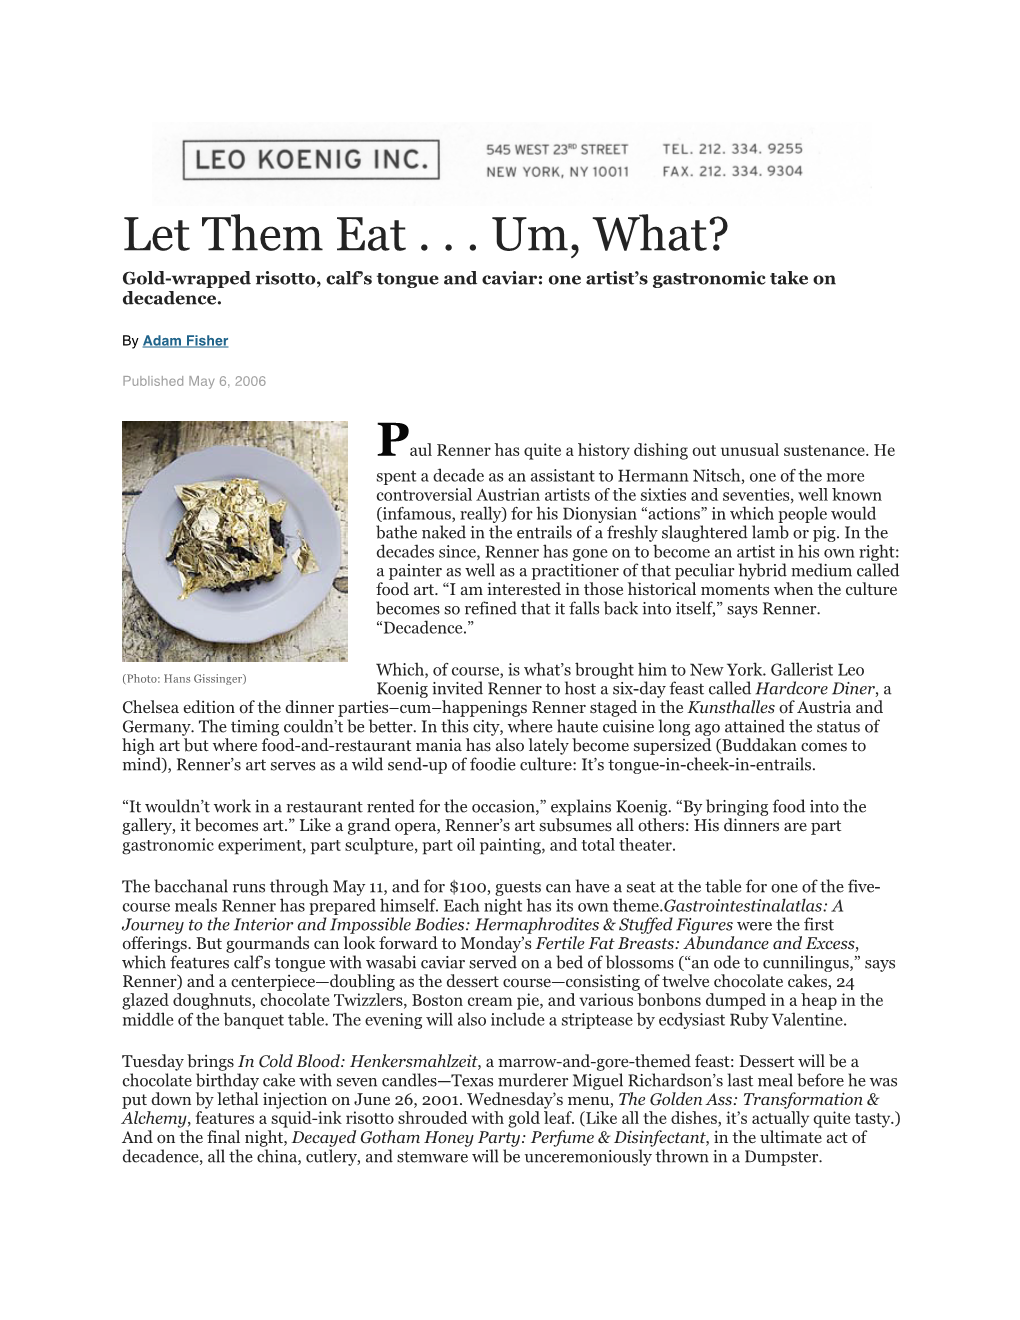 Let Them Eat . . . Um, What? Gold-Wrapped Risotto, Calf’S Tongue and Caviar: One Artist’S Gastronomic Take on Decadence